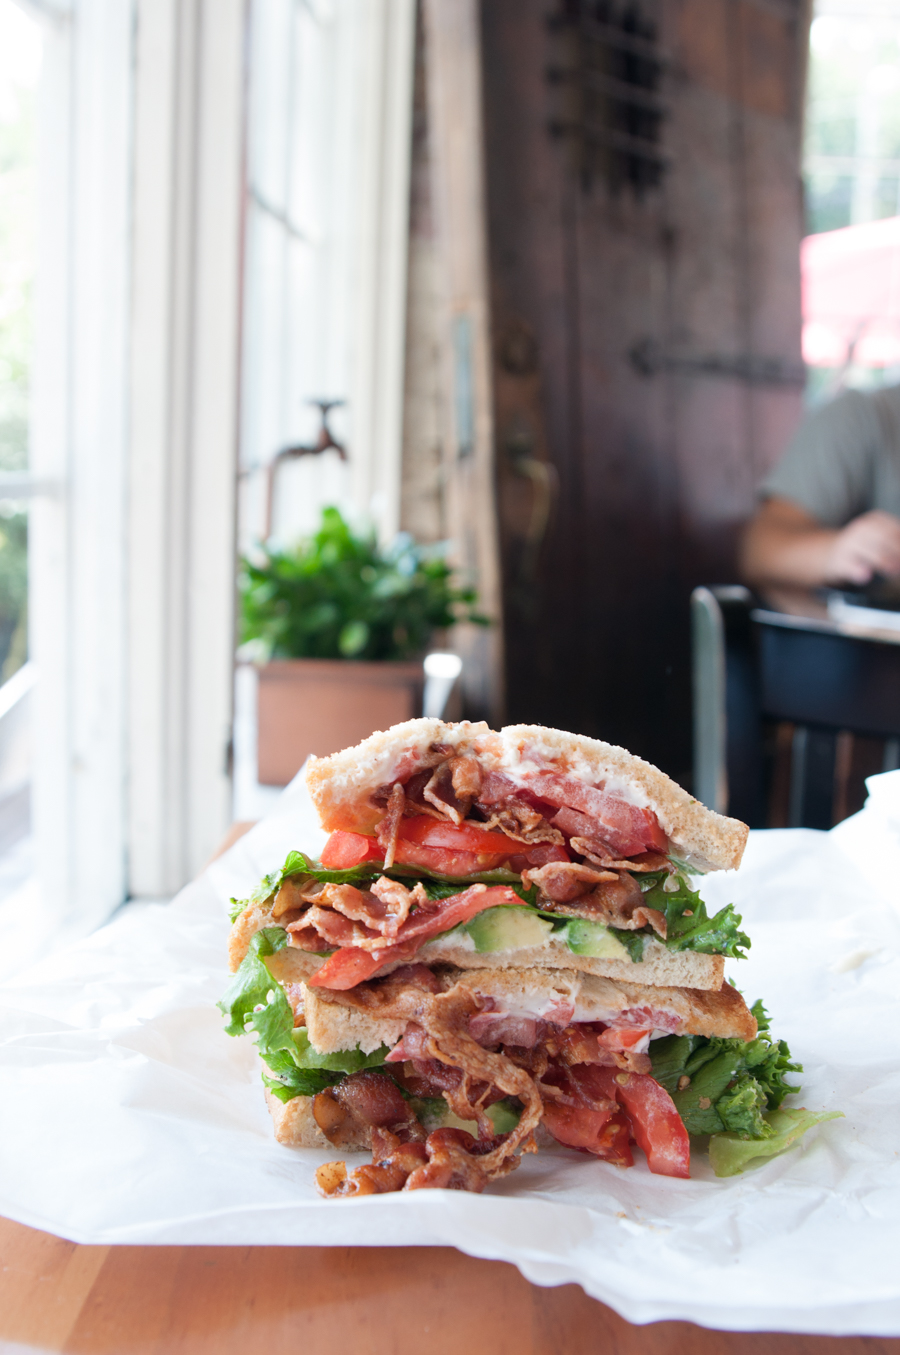 Merritt's - Where To Get Your Sandwich Fix in the Research Triangle Area